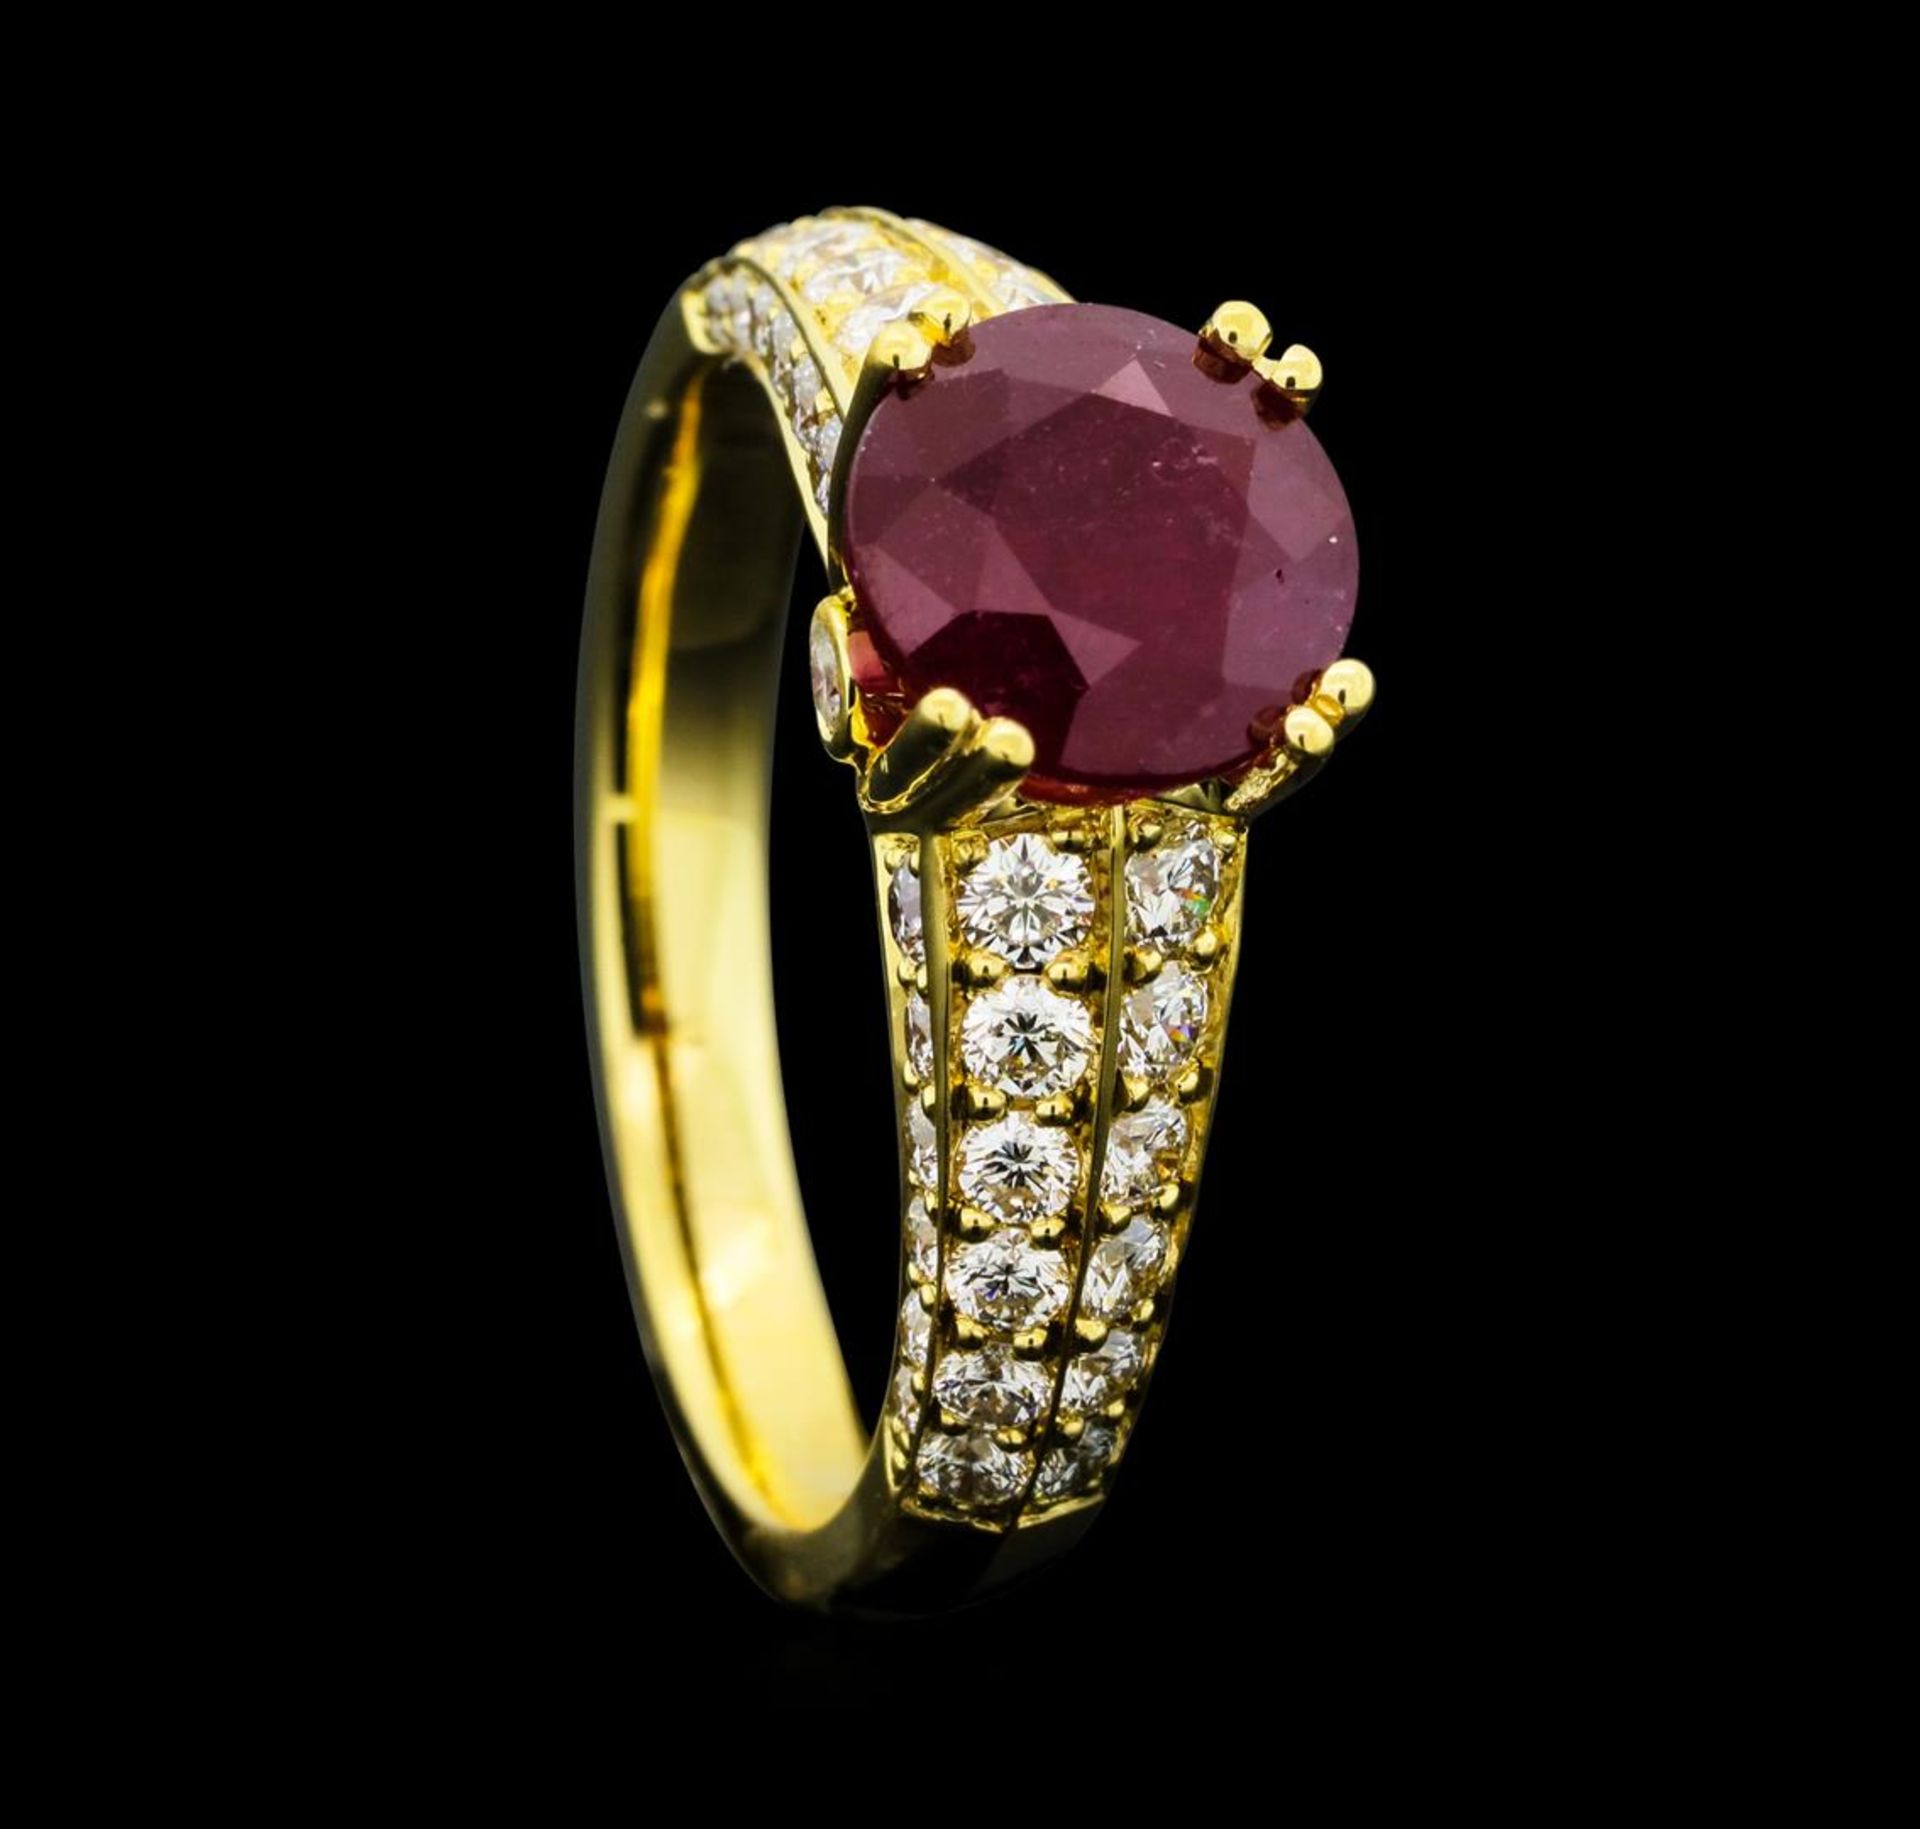 2.54 ctw Ruby And Diamond Ring - 18KT Yellow Gold - Image 4 of 5